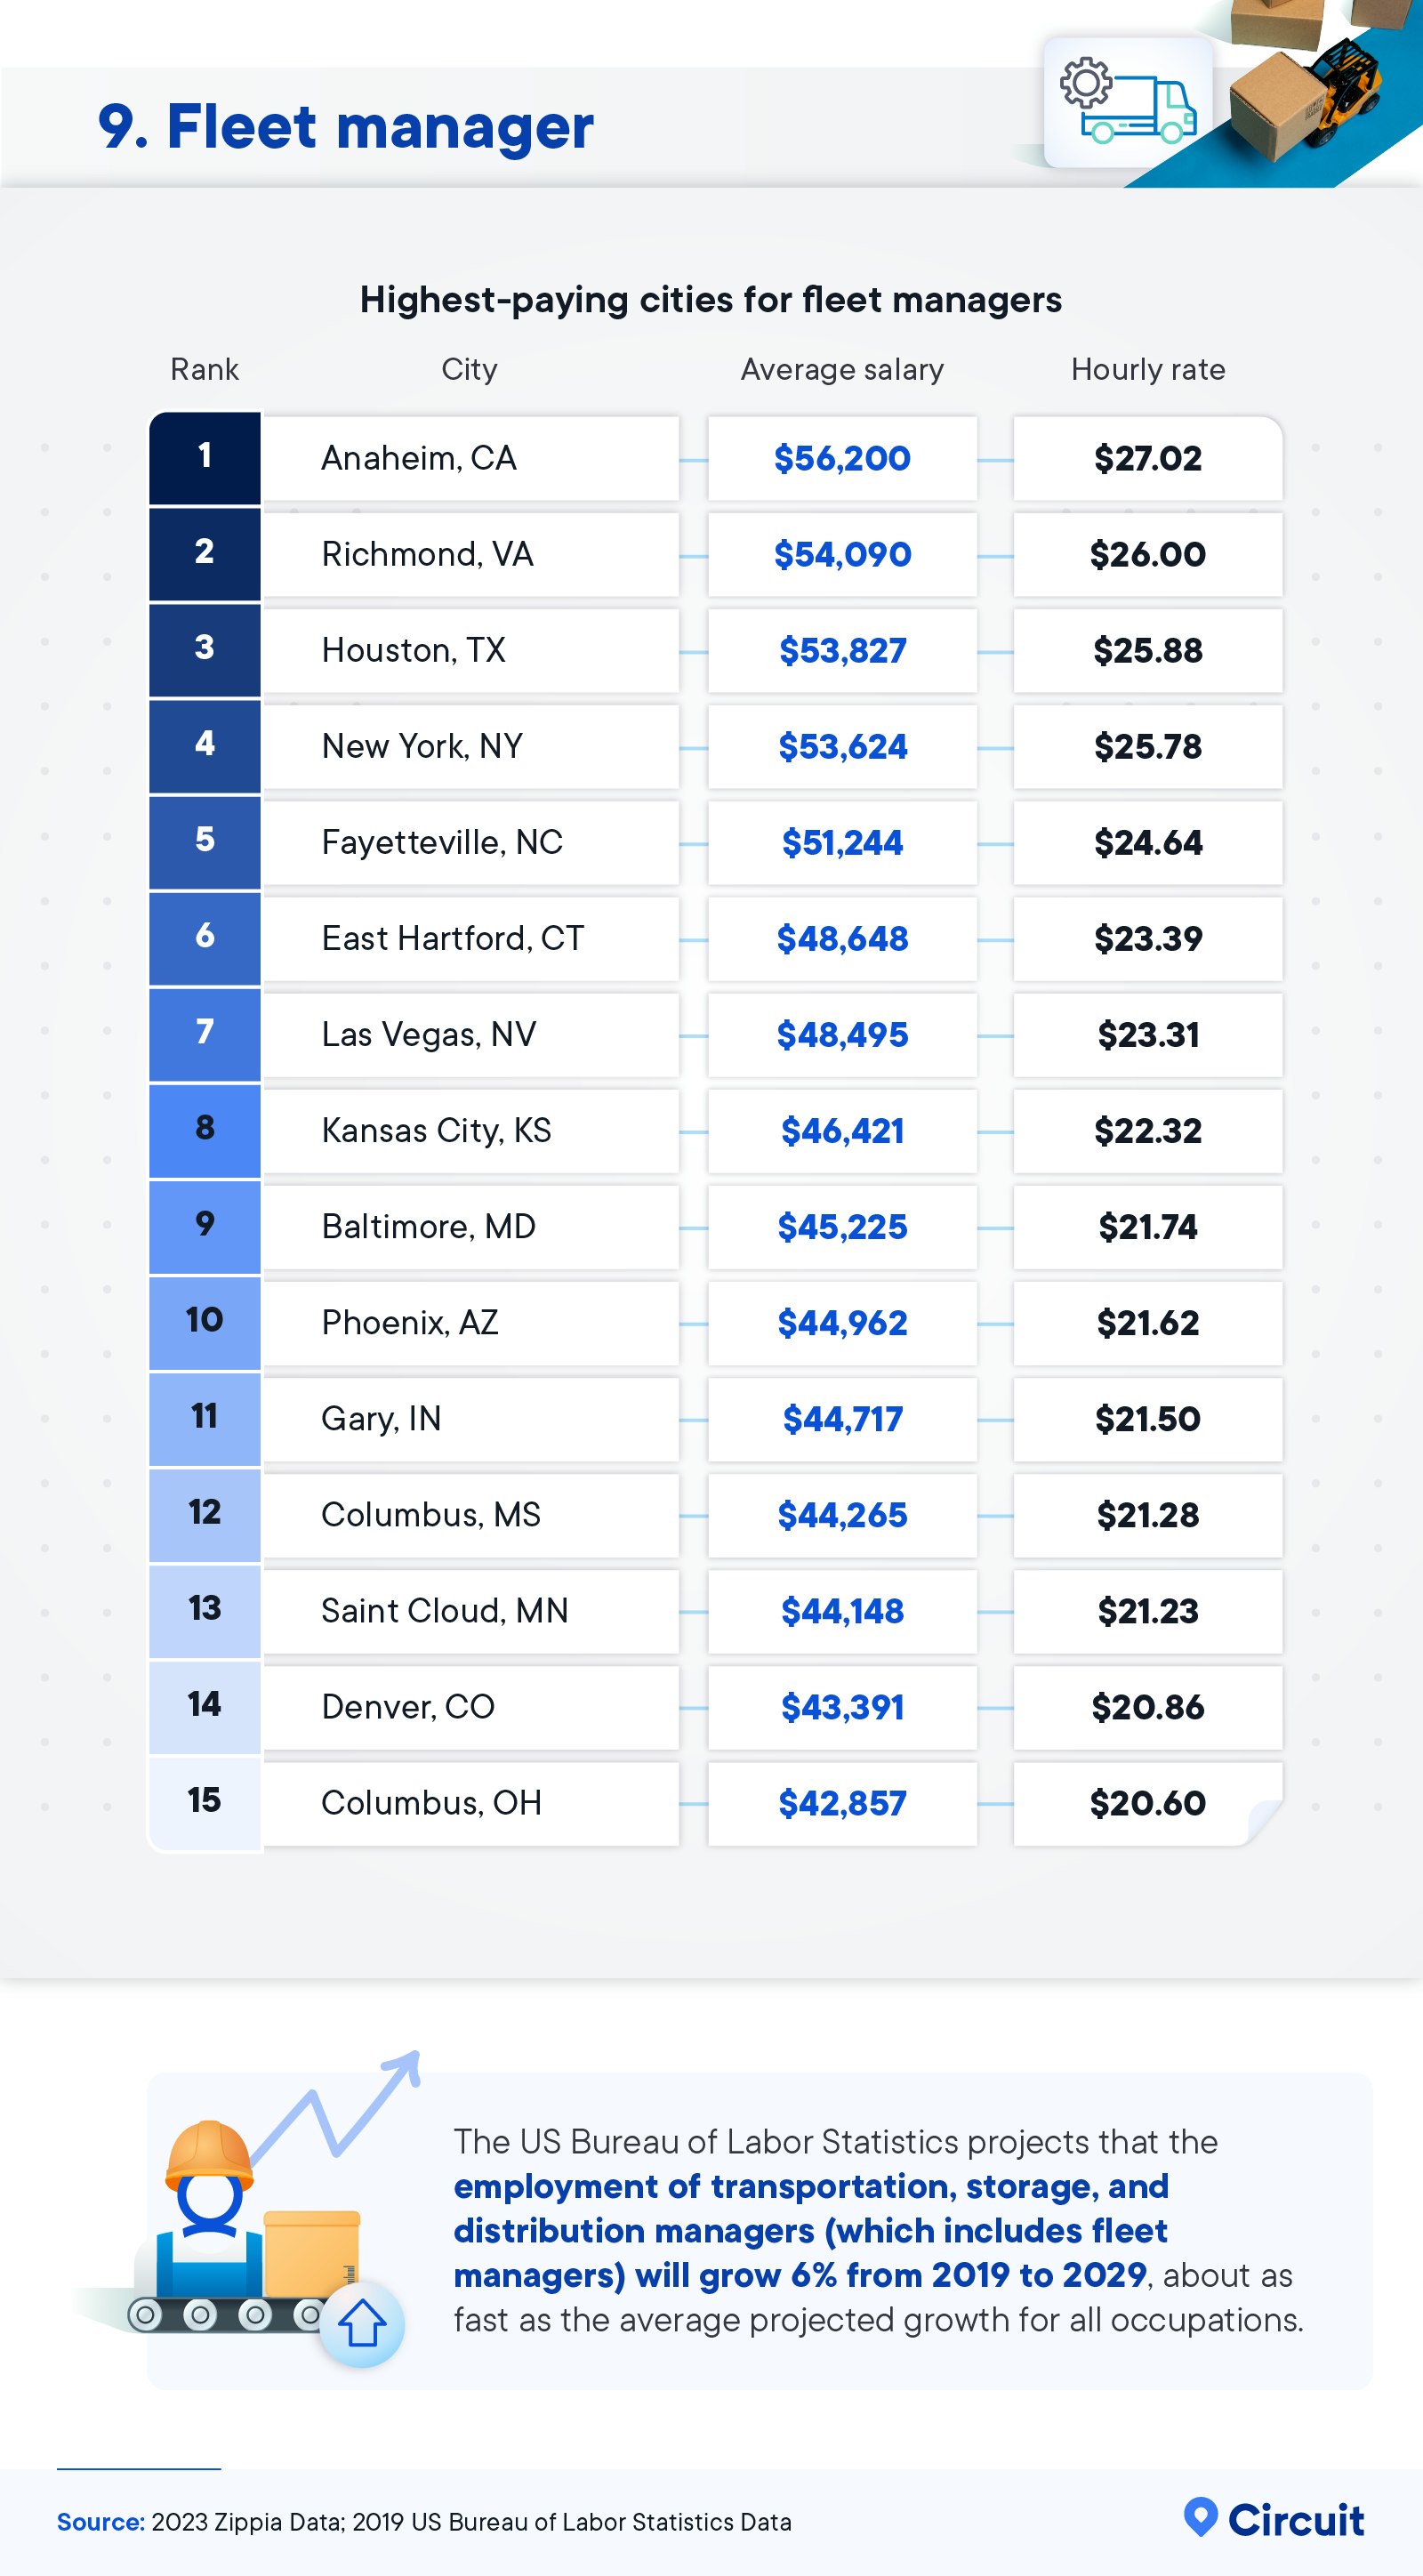 Highest-paying cities for fleet managers